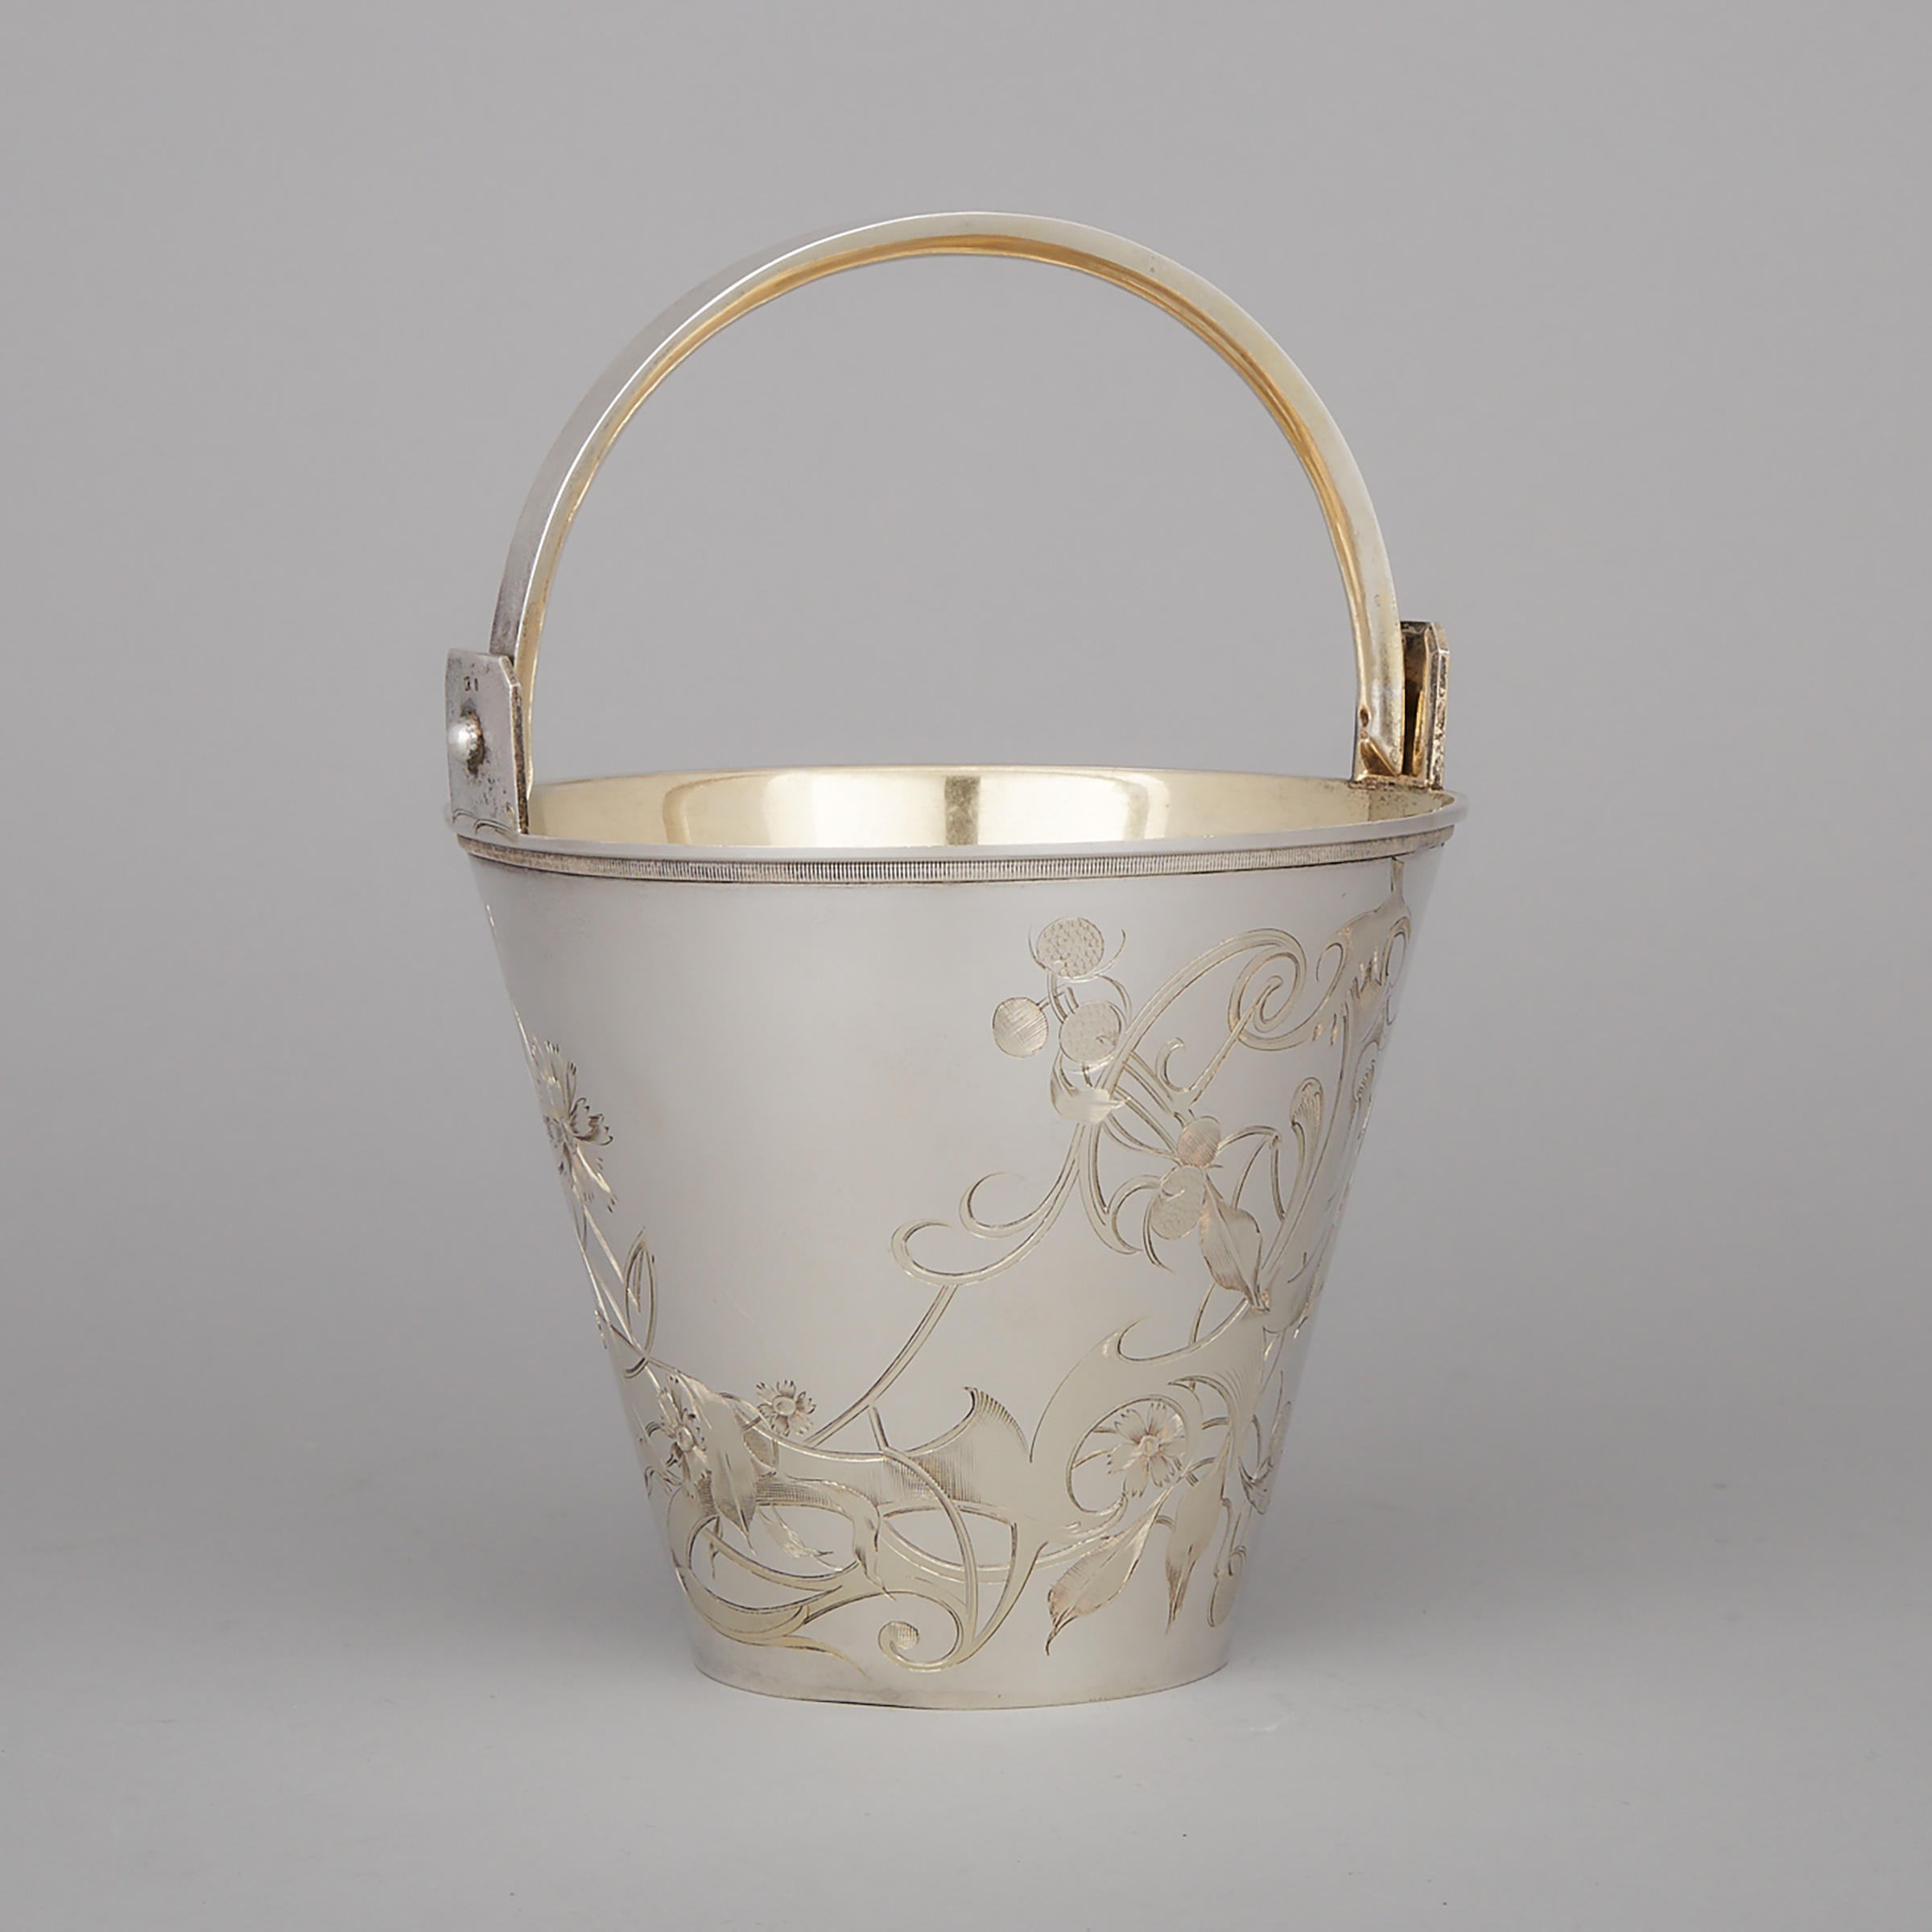 Russian Silver Ice Pail, probably Ivan Saltikov, Moscow, c.1900-08